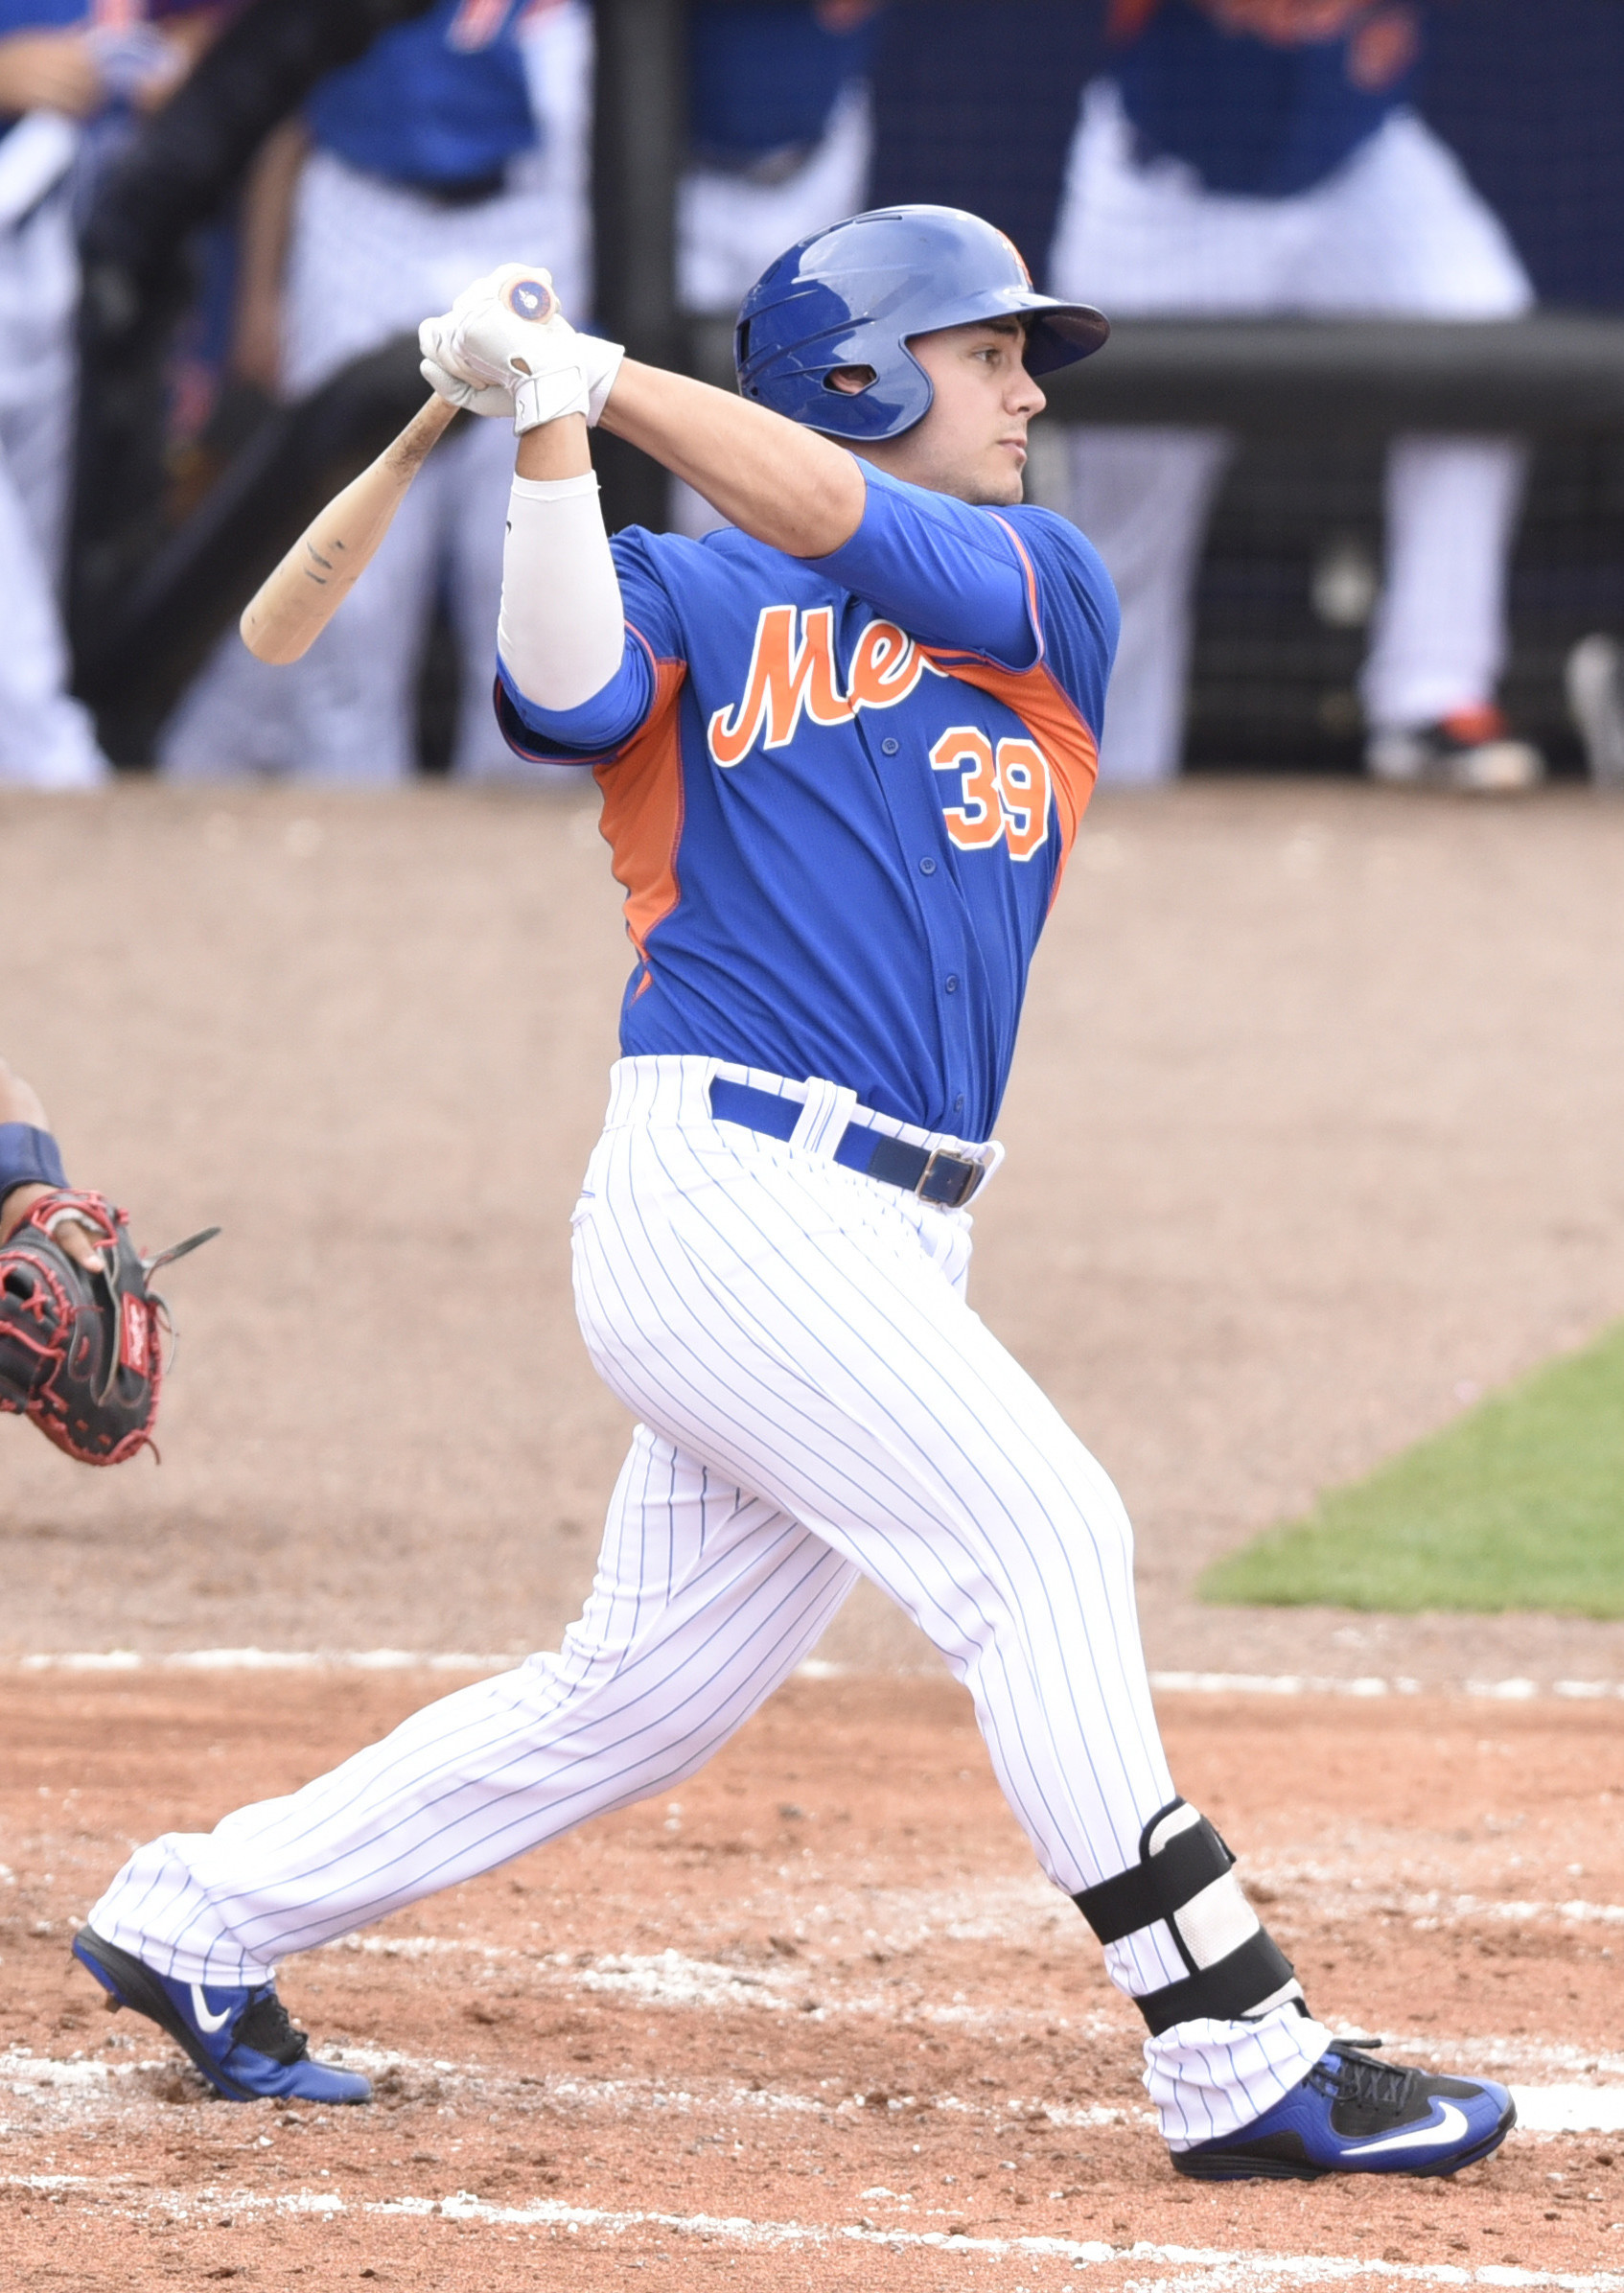 Mets: Is Michael Conforto the next David Wright?